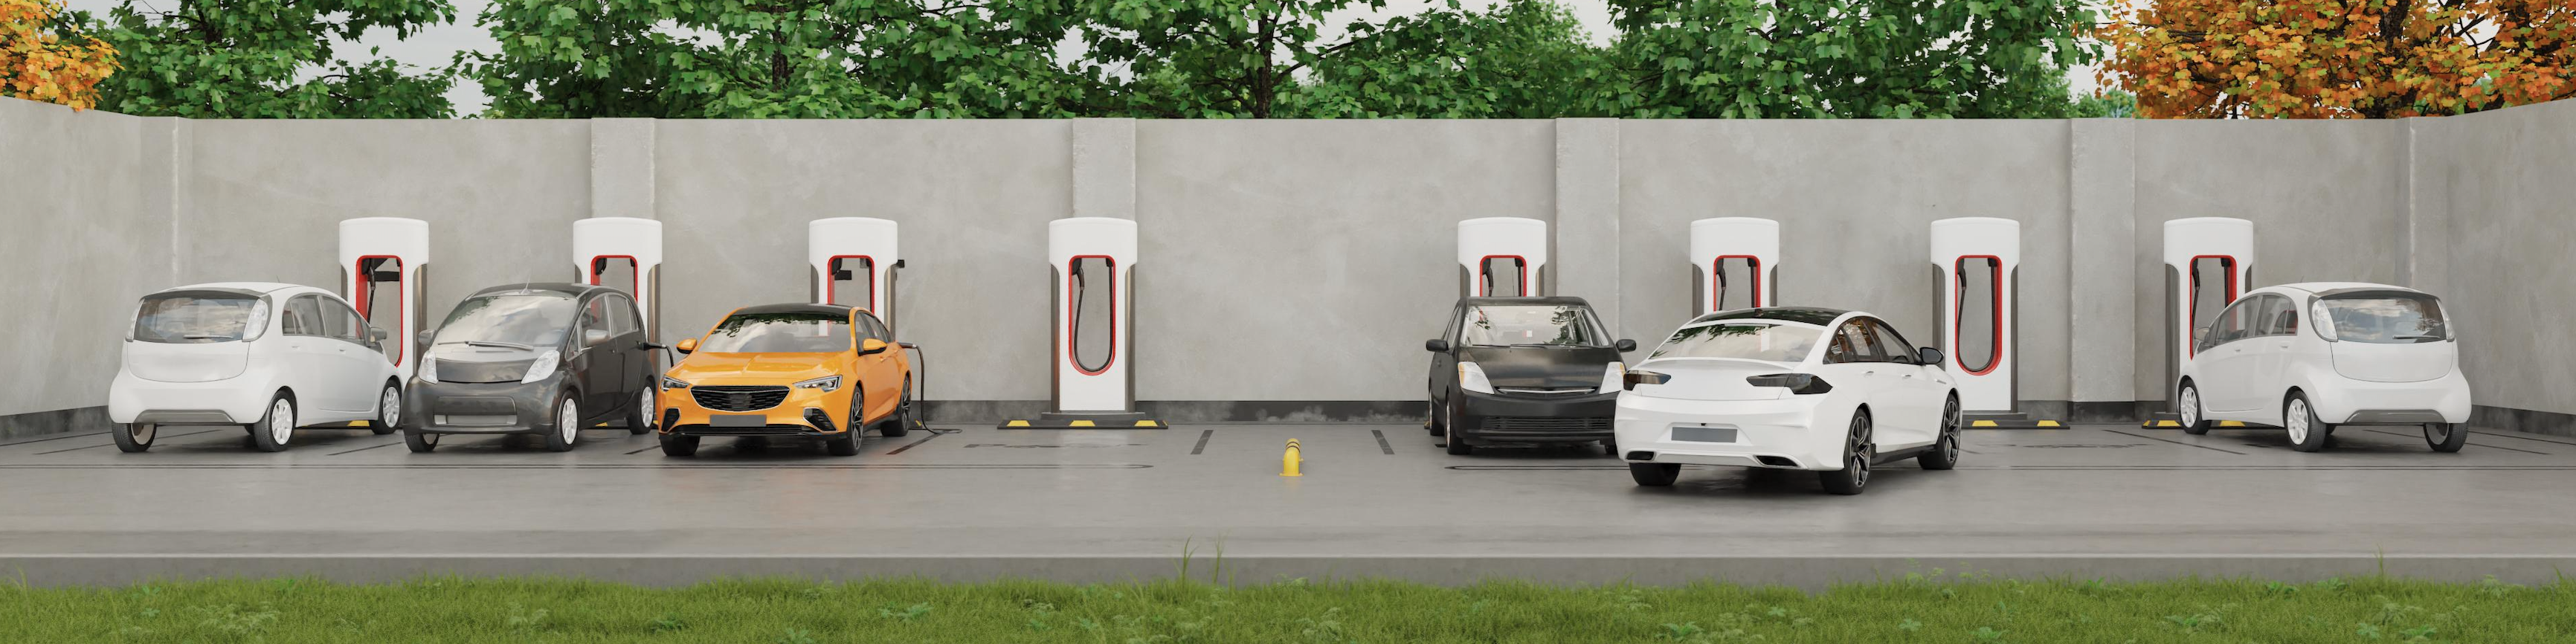 image of parking lot with charging stations for electric cars